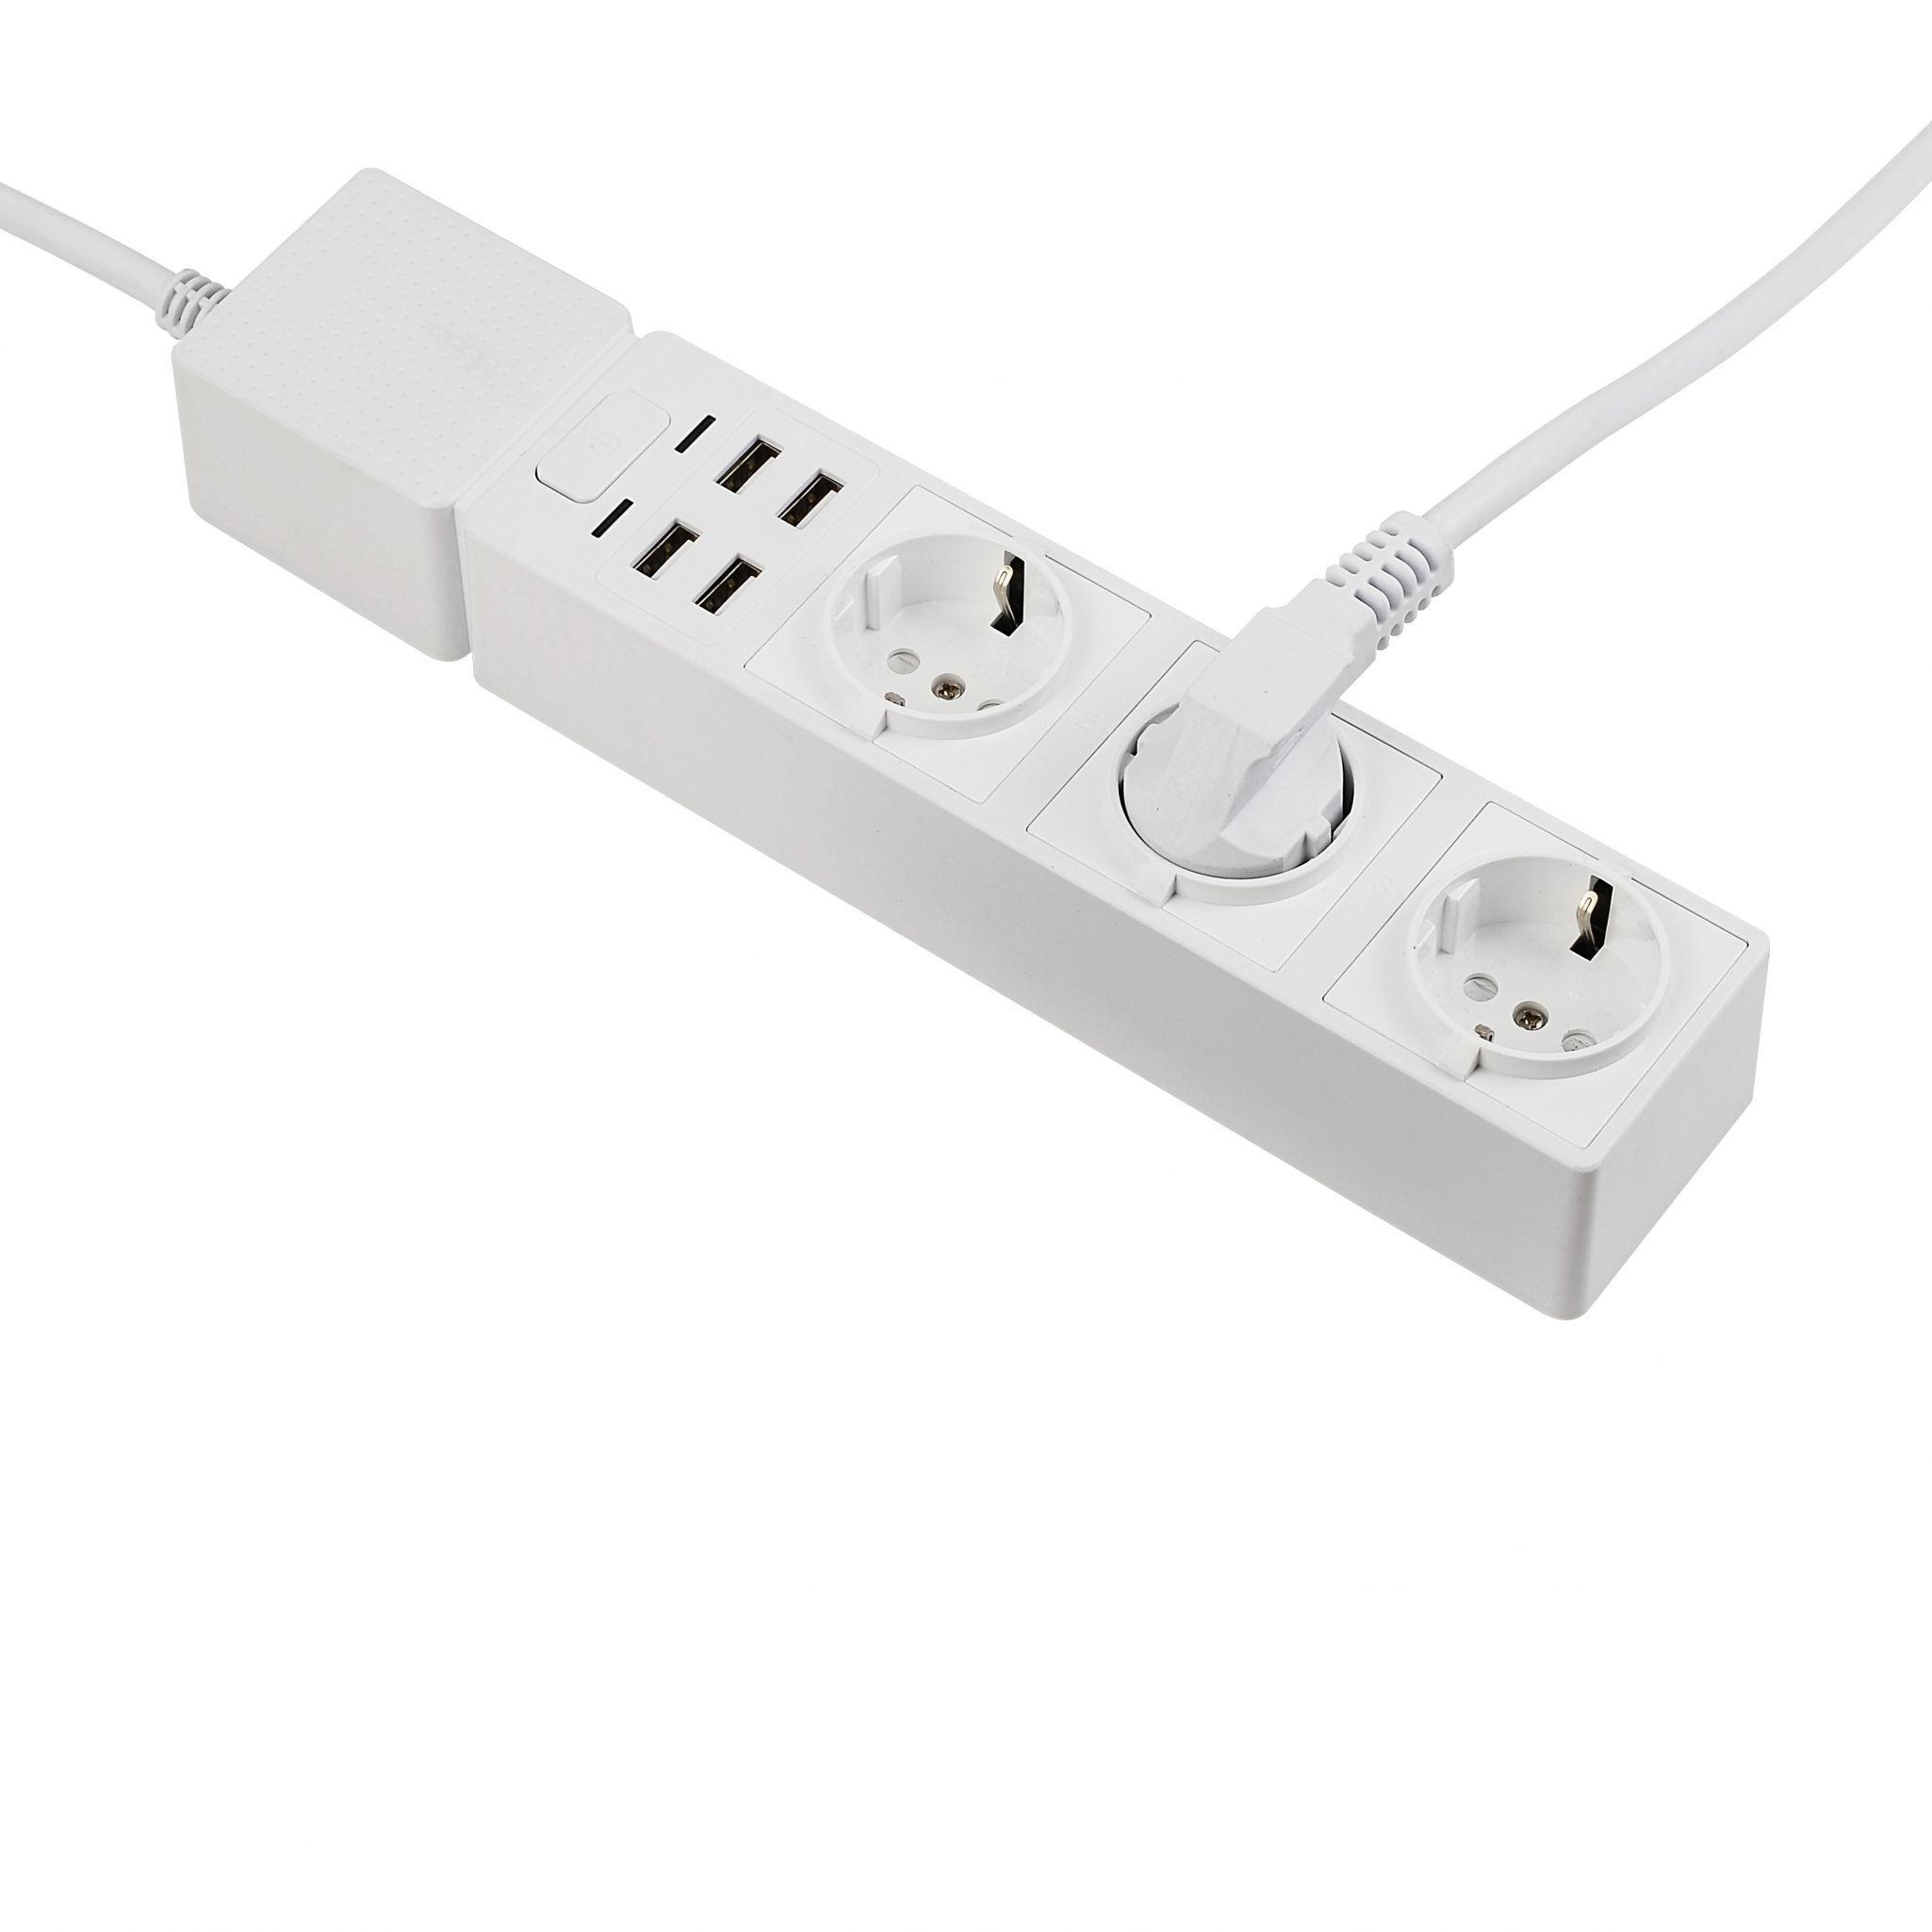 Edimax SP-1123WT power extension 1.5 m 3 AC outlet(s) Indoor White